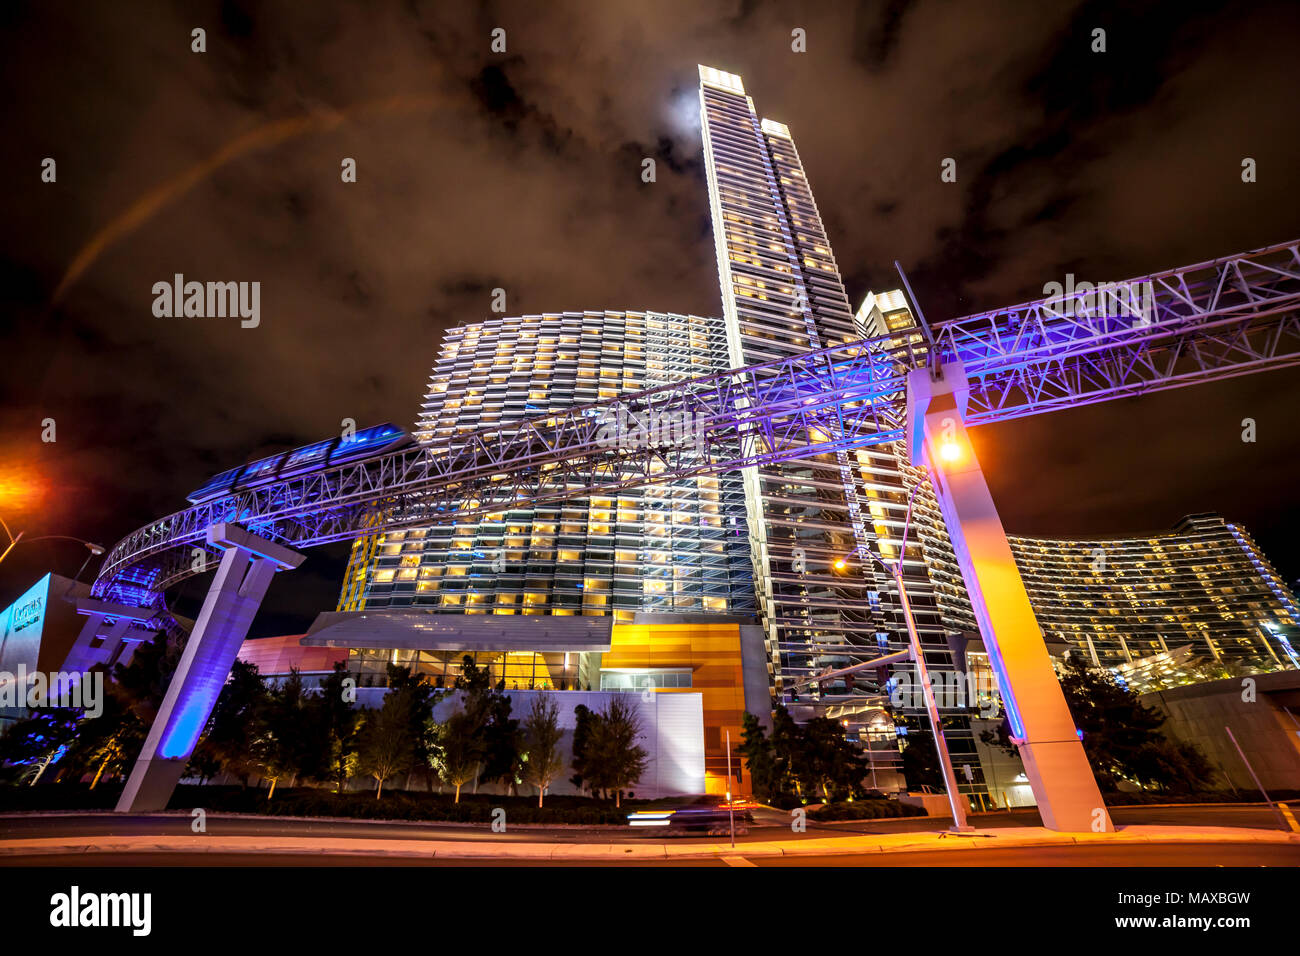 Looking up at the Aria Express and the Aria Resort and Casino, Las Vegas, Narvarda, U.S.A. Stock Photo